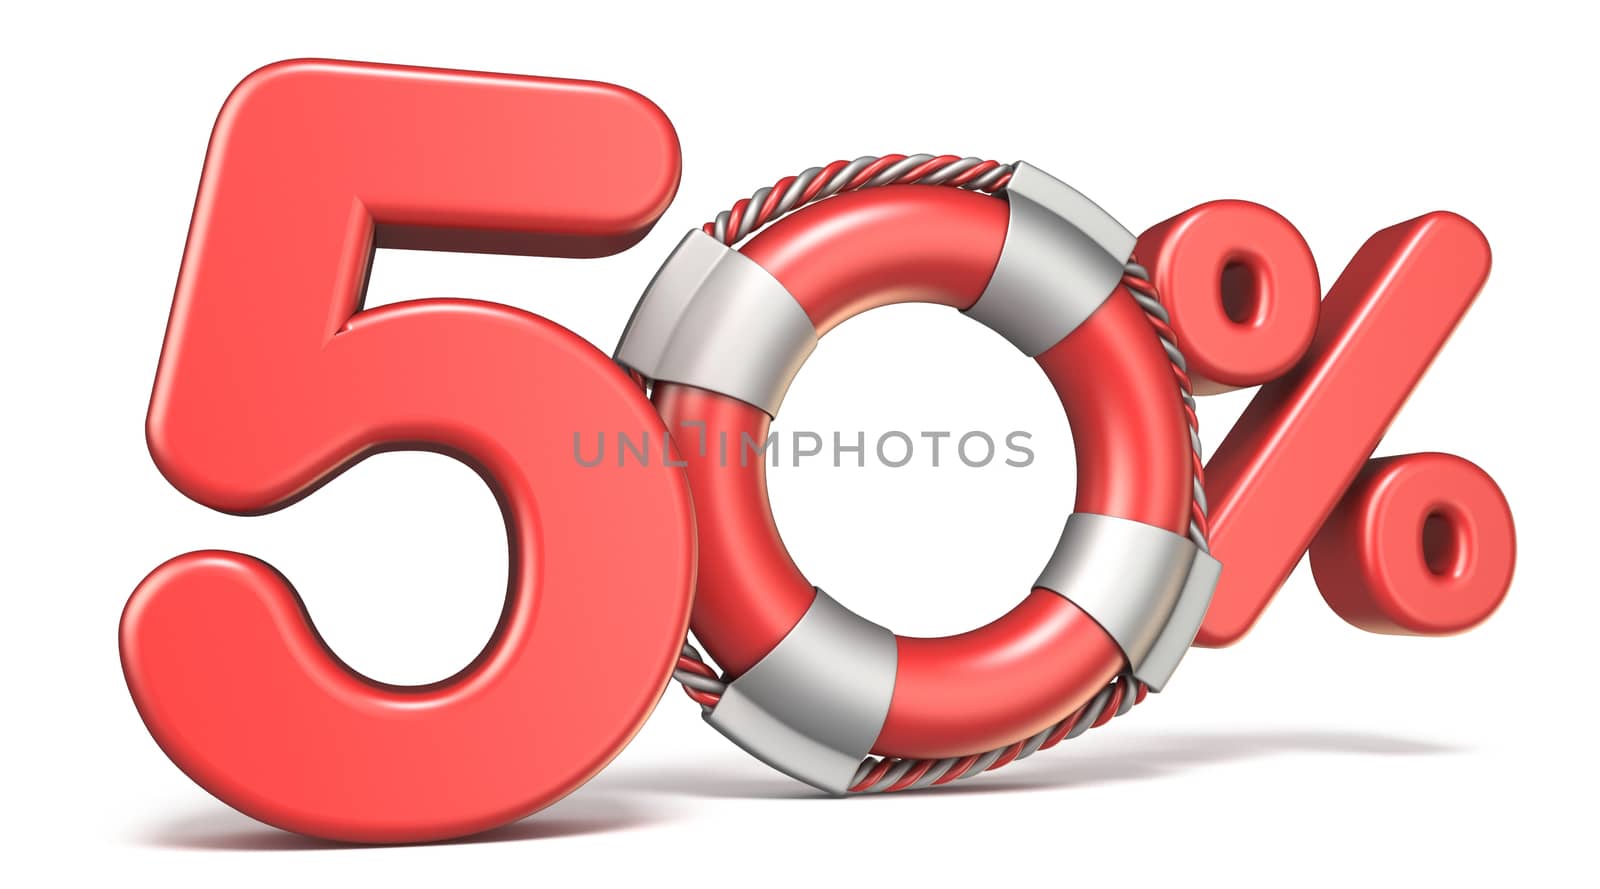 Life buoy 50 percent sign 3D render illustration isolated on white background